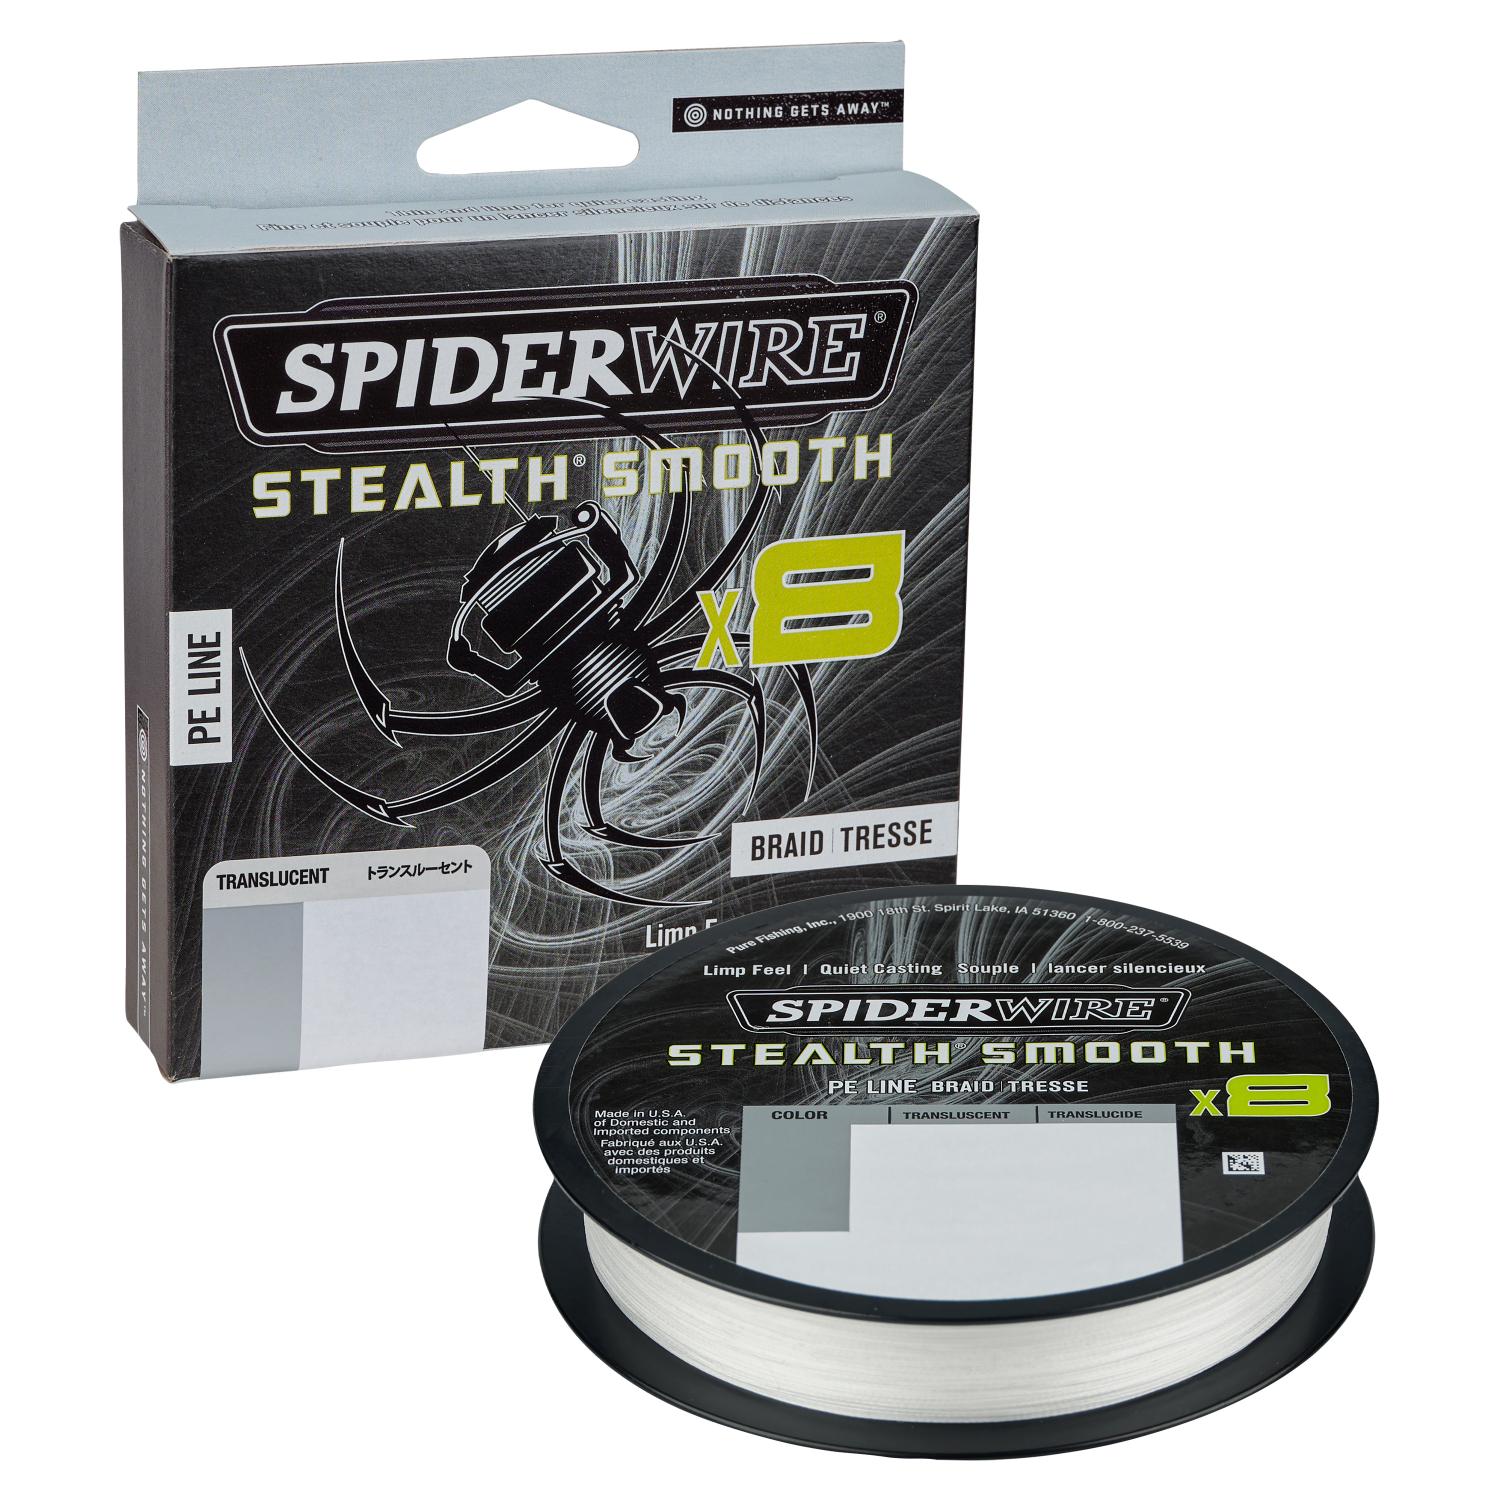 Spiderwire Fishing Line Stealth Smooth 8 (Translucent, 150 m) at